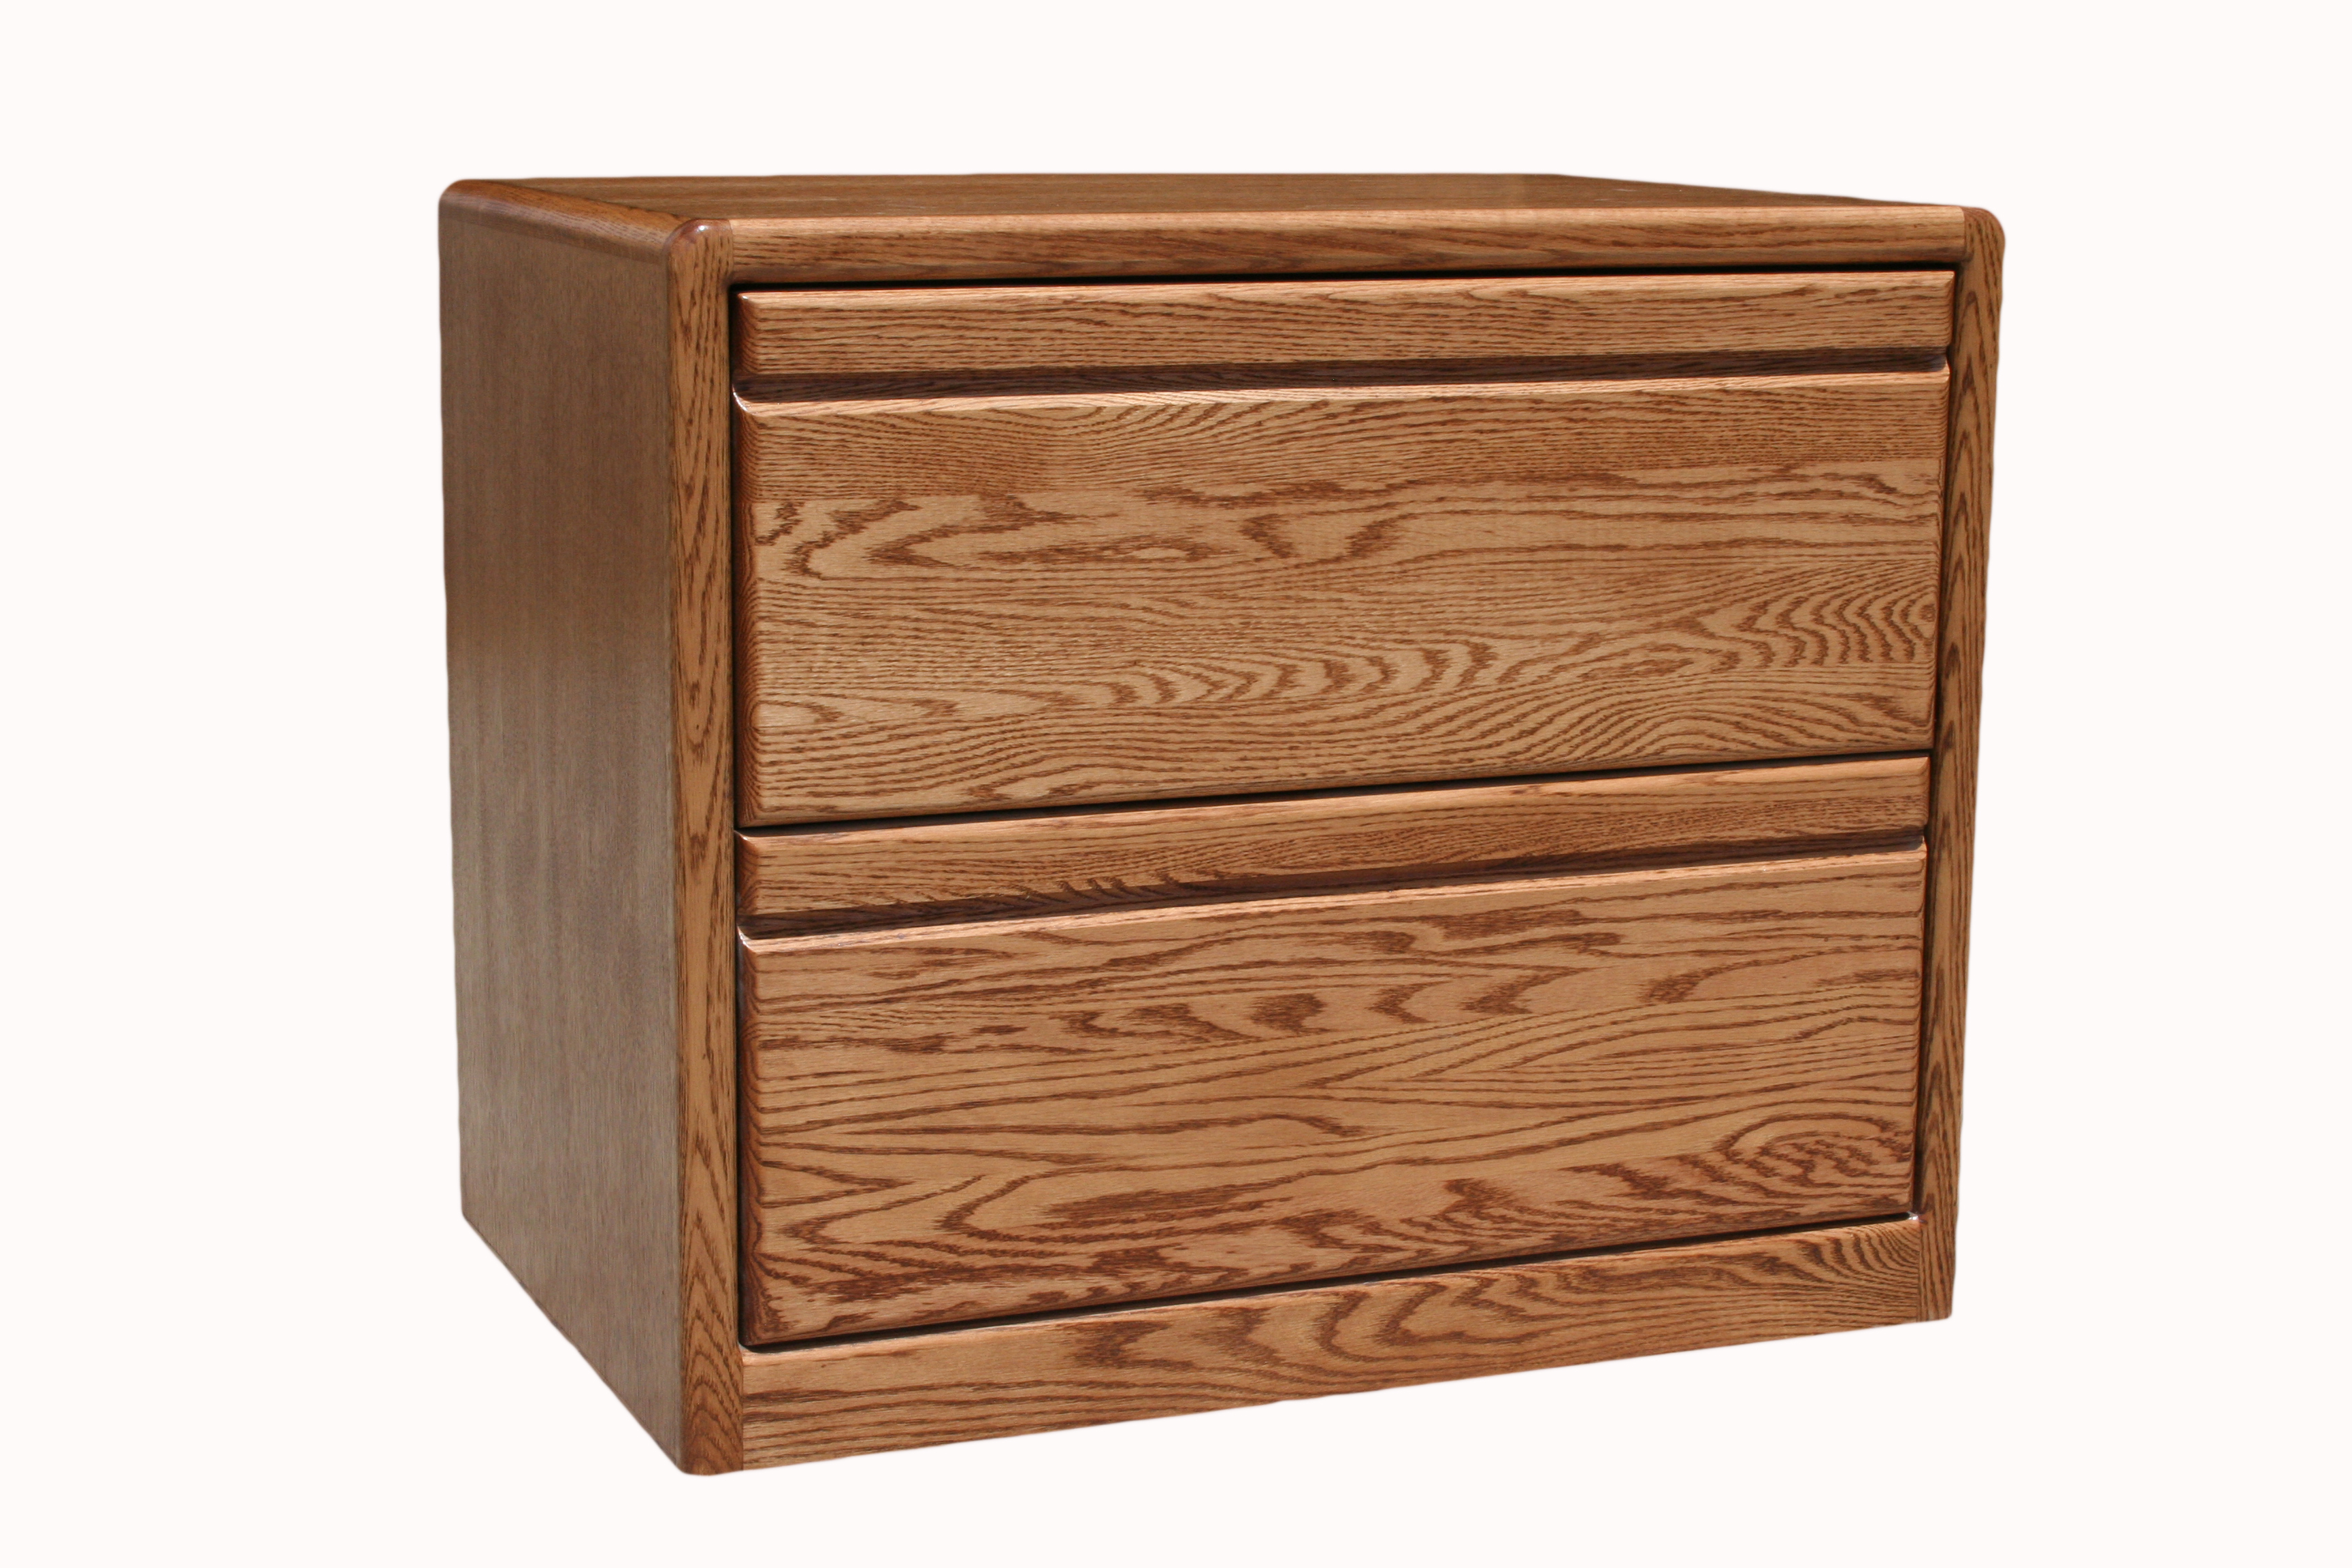 O C650 Modern Oak 2 Drawer Locking Lateral File Cabinet 36w X 20 pertaining to size 3456 X 2304